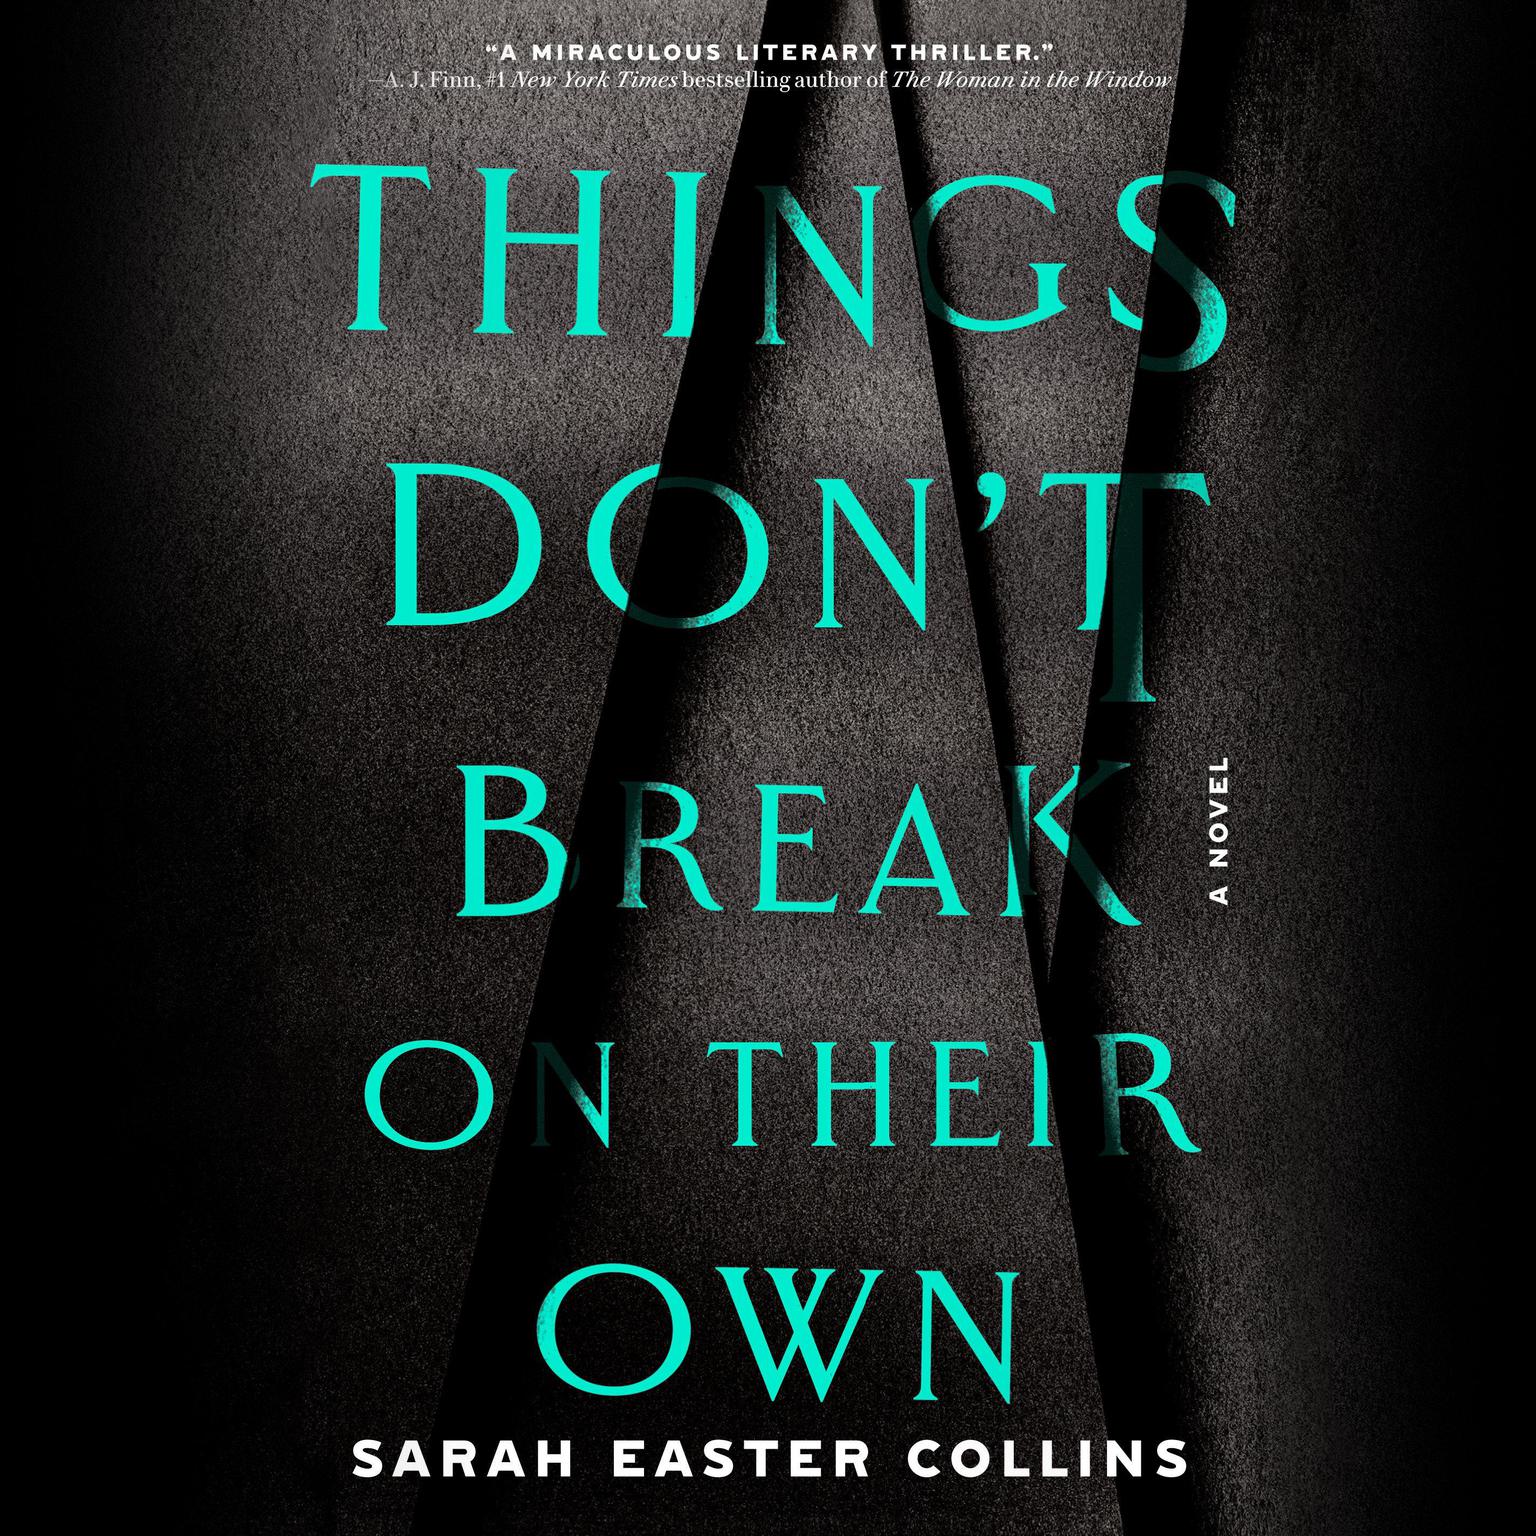 Things Dont Break on Their Own: A Novel Audiobook, by Sarah Easter Collins